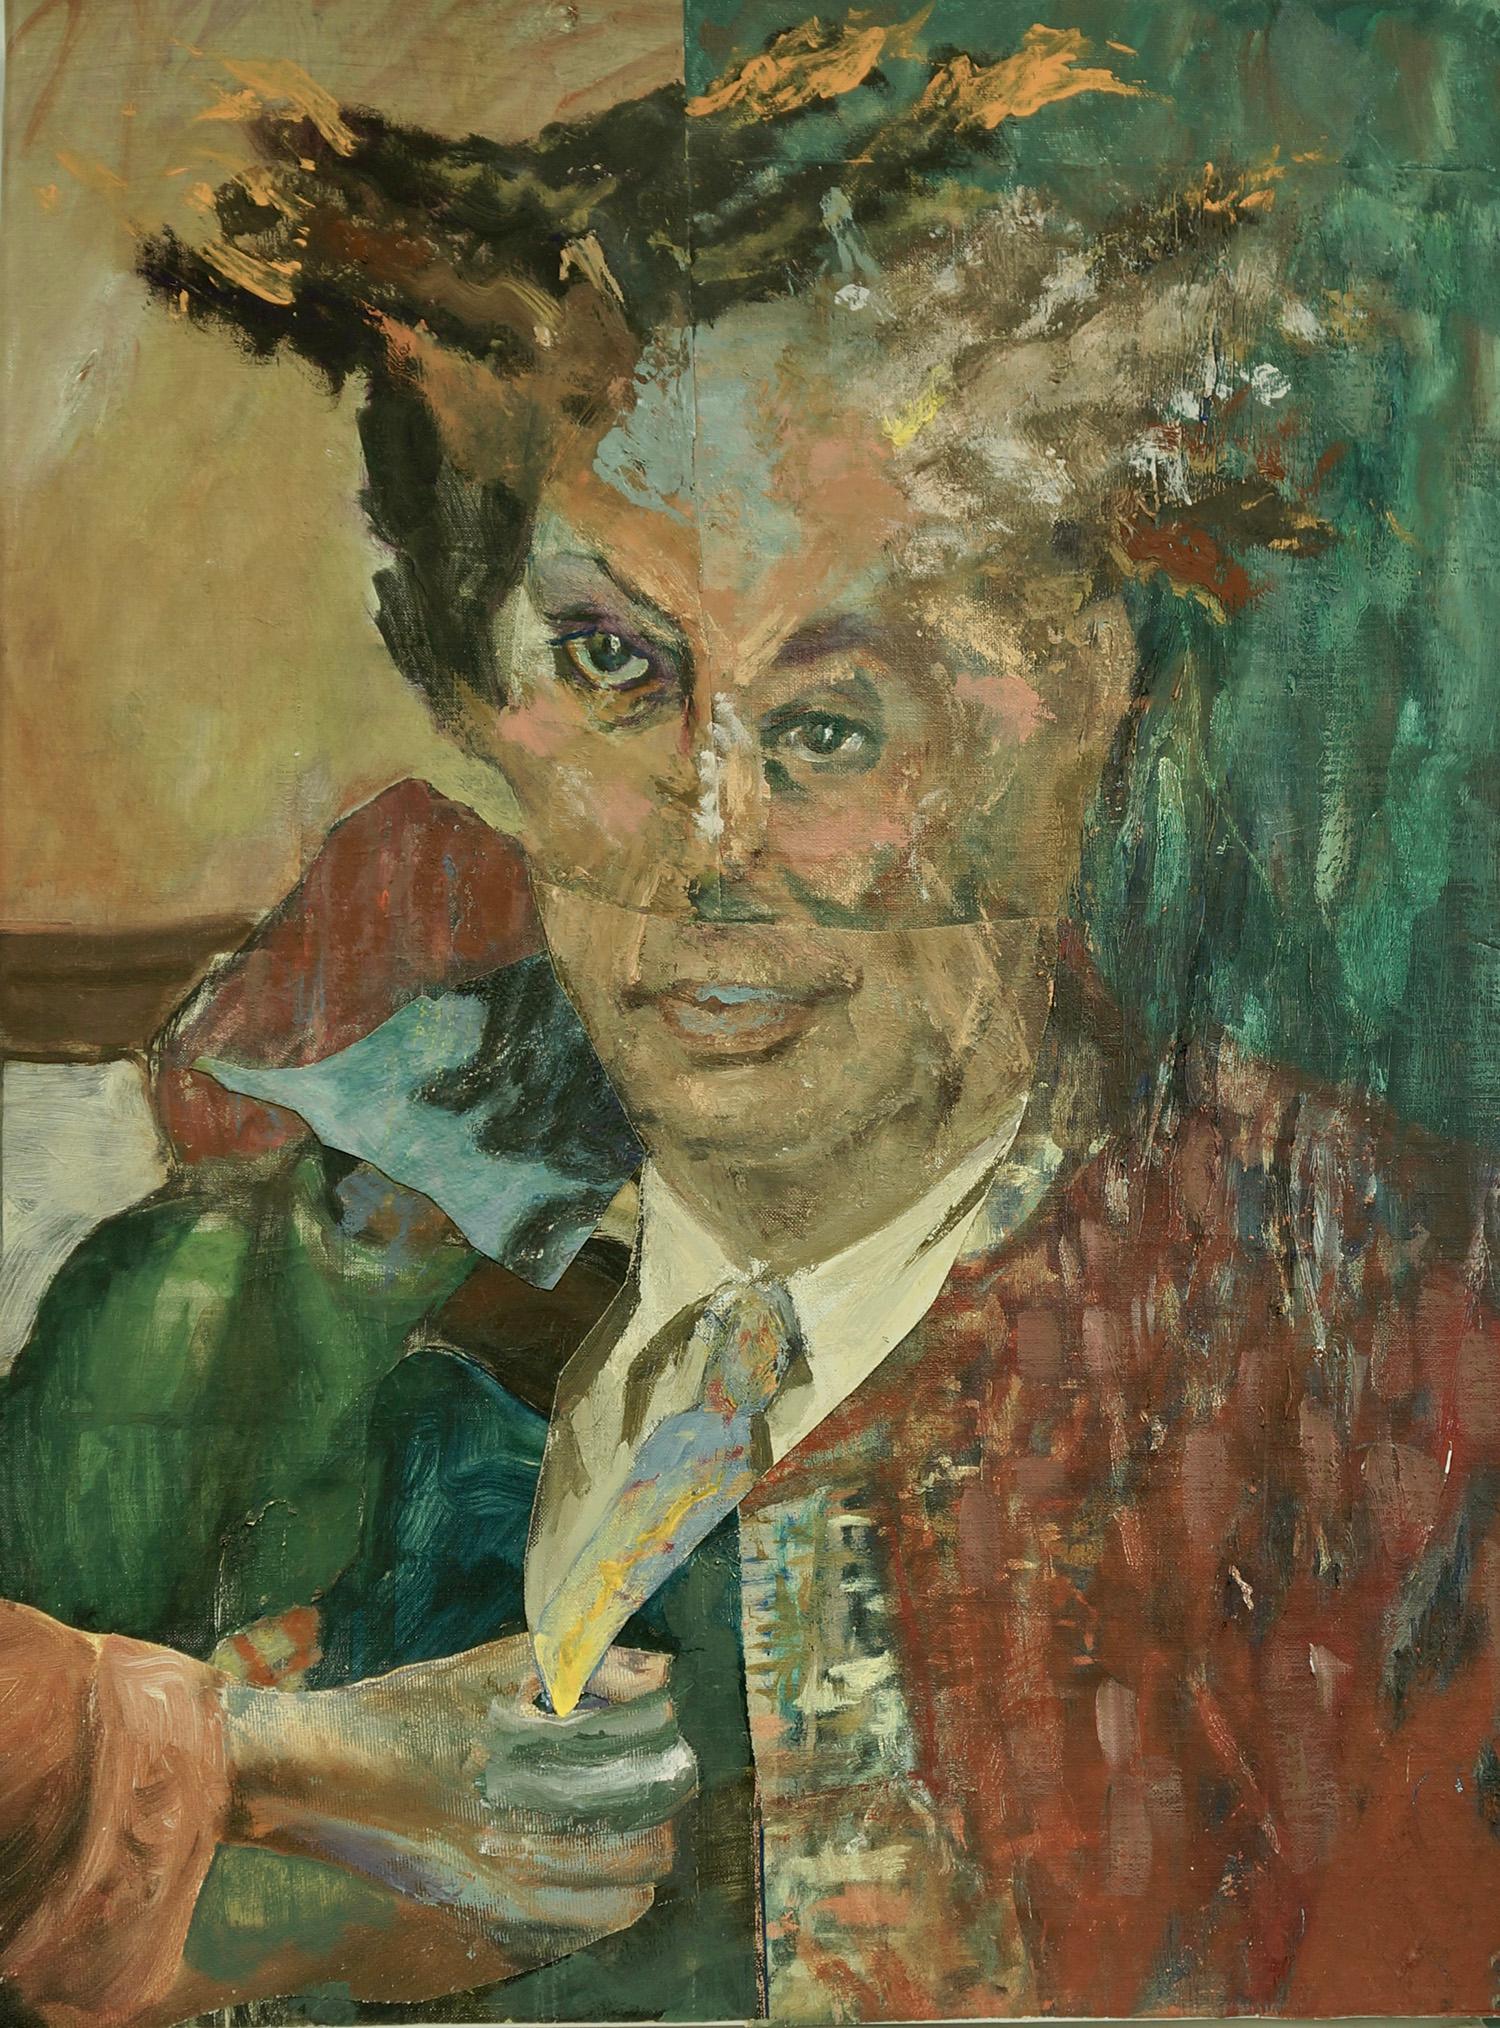 John Baker Portrait Painting - "Man Adjusting his Tie", surrealist, green, red, blue, yellow, acrylic painting